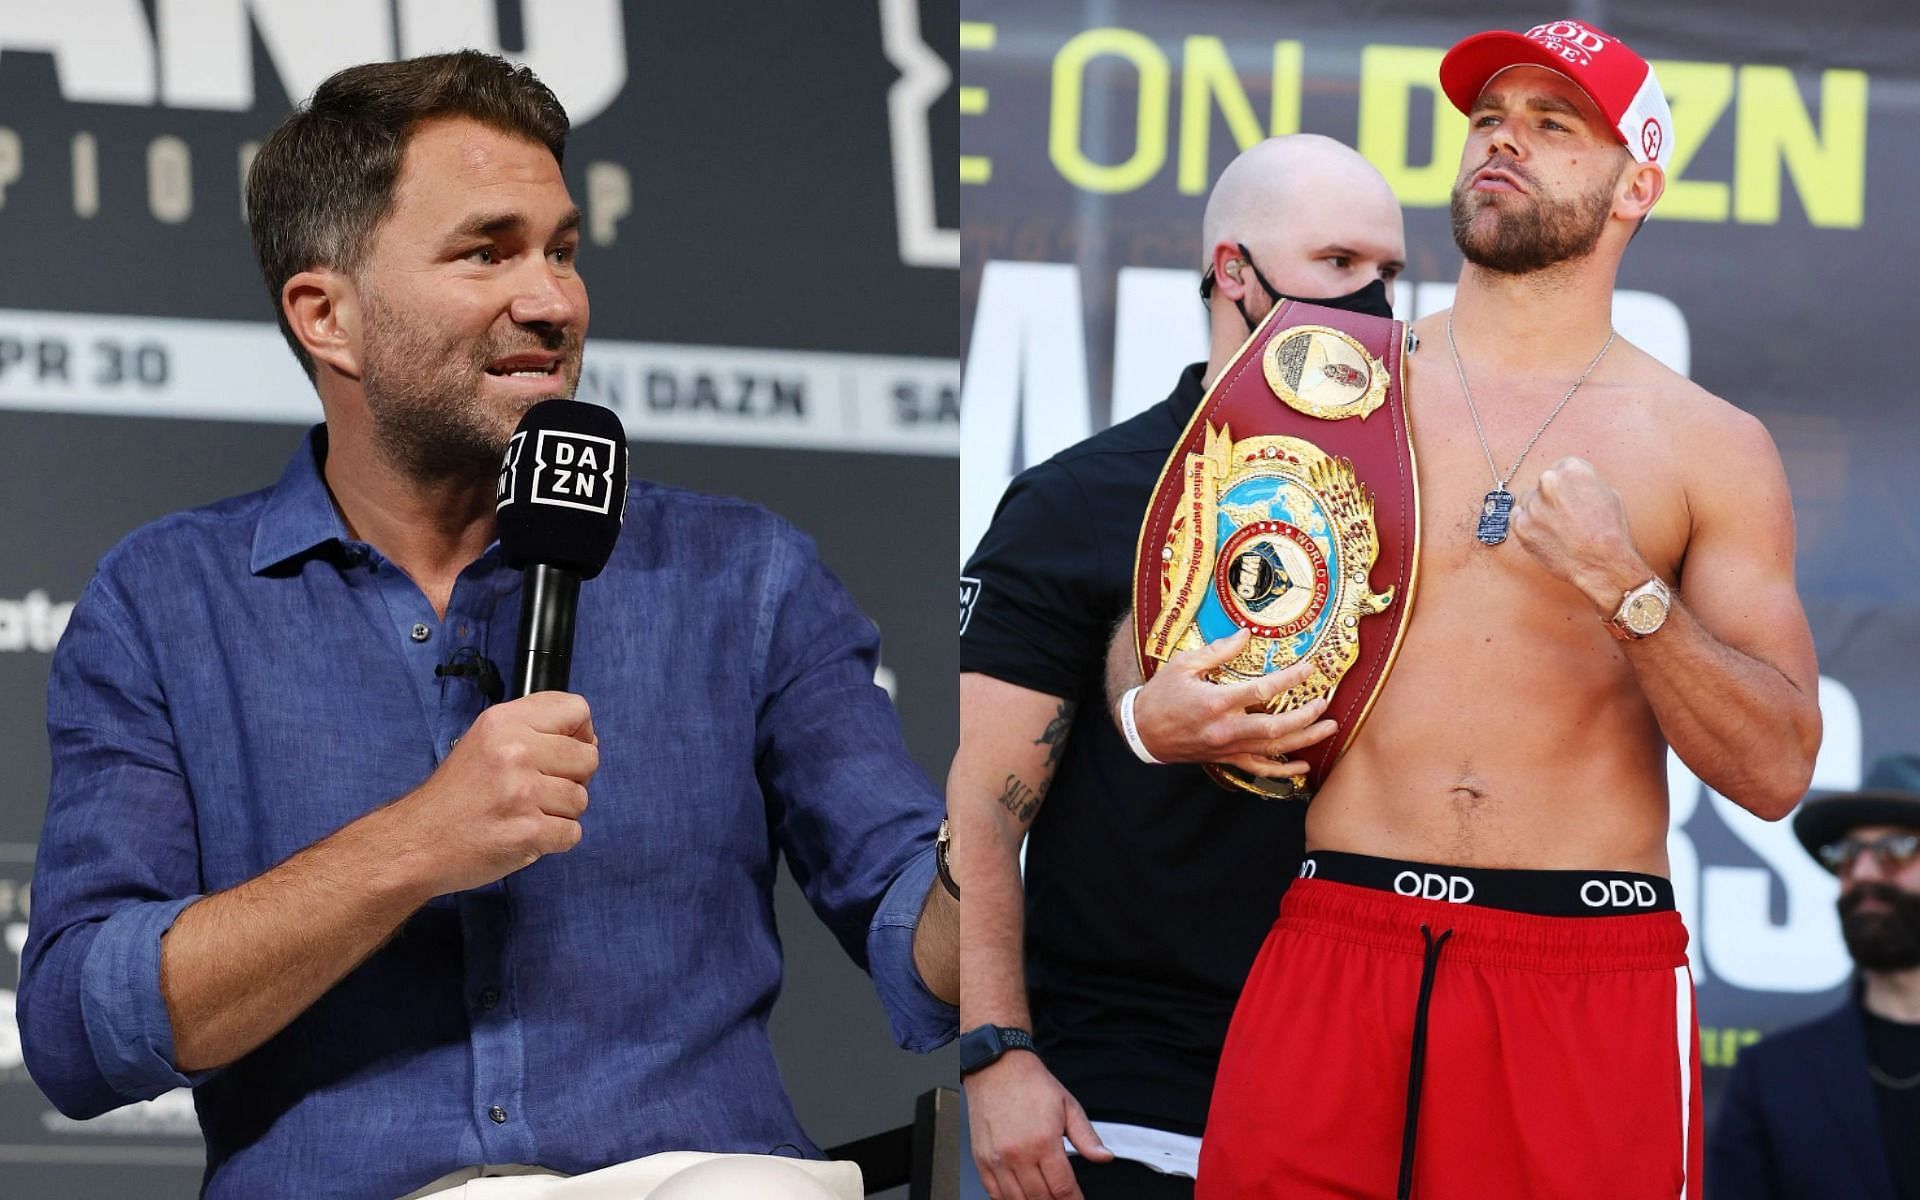 Eddie Hearn (L) has revealed that Billy Joe Saunders (R) will return later this year.